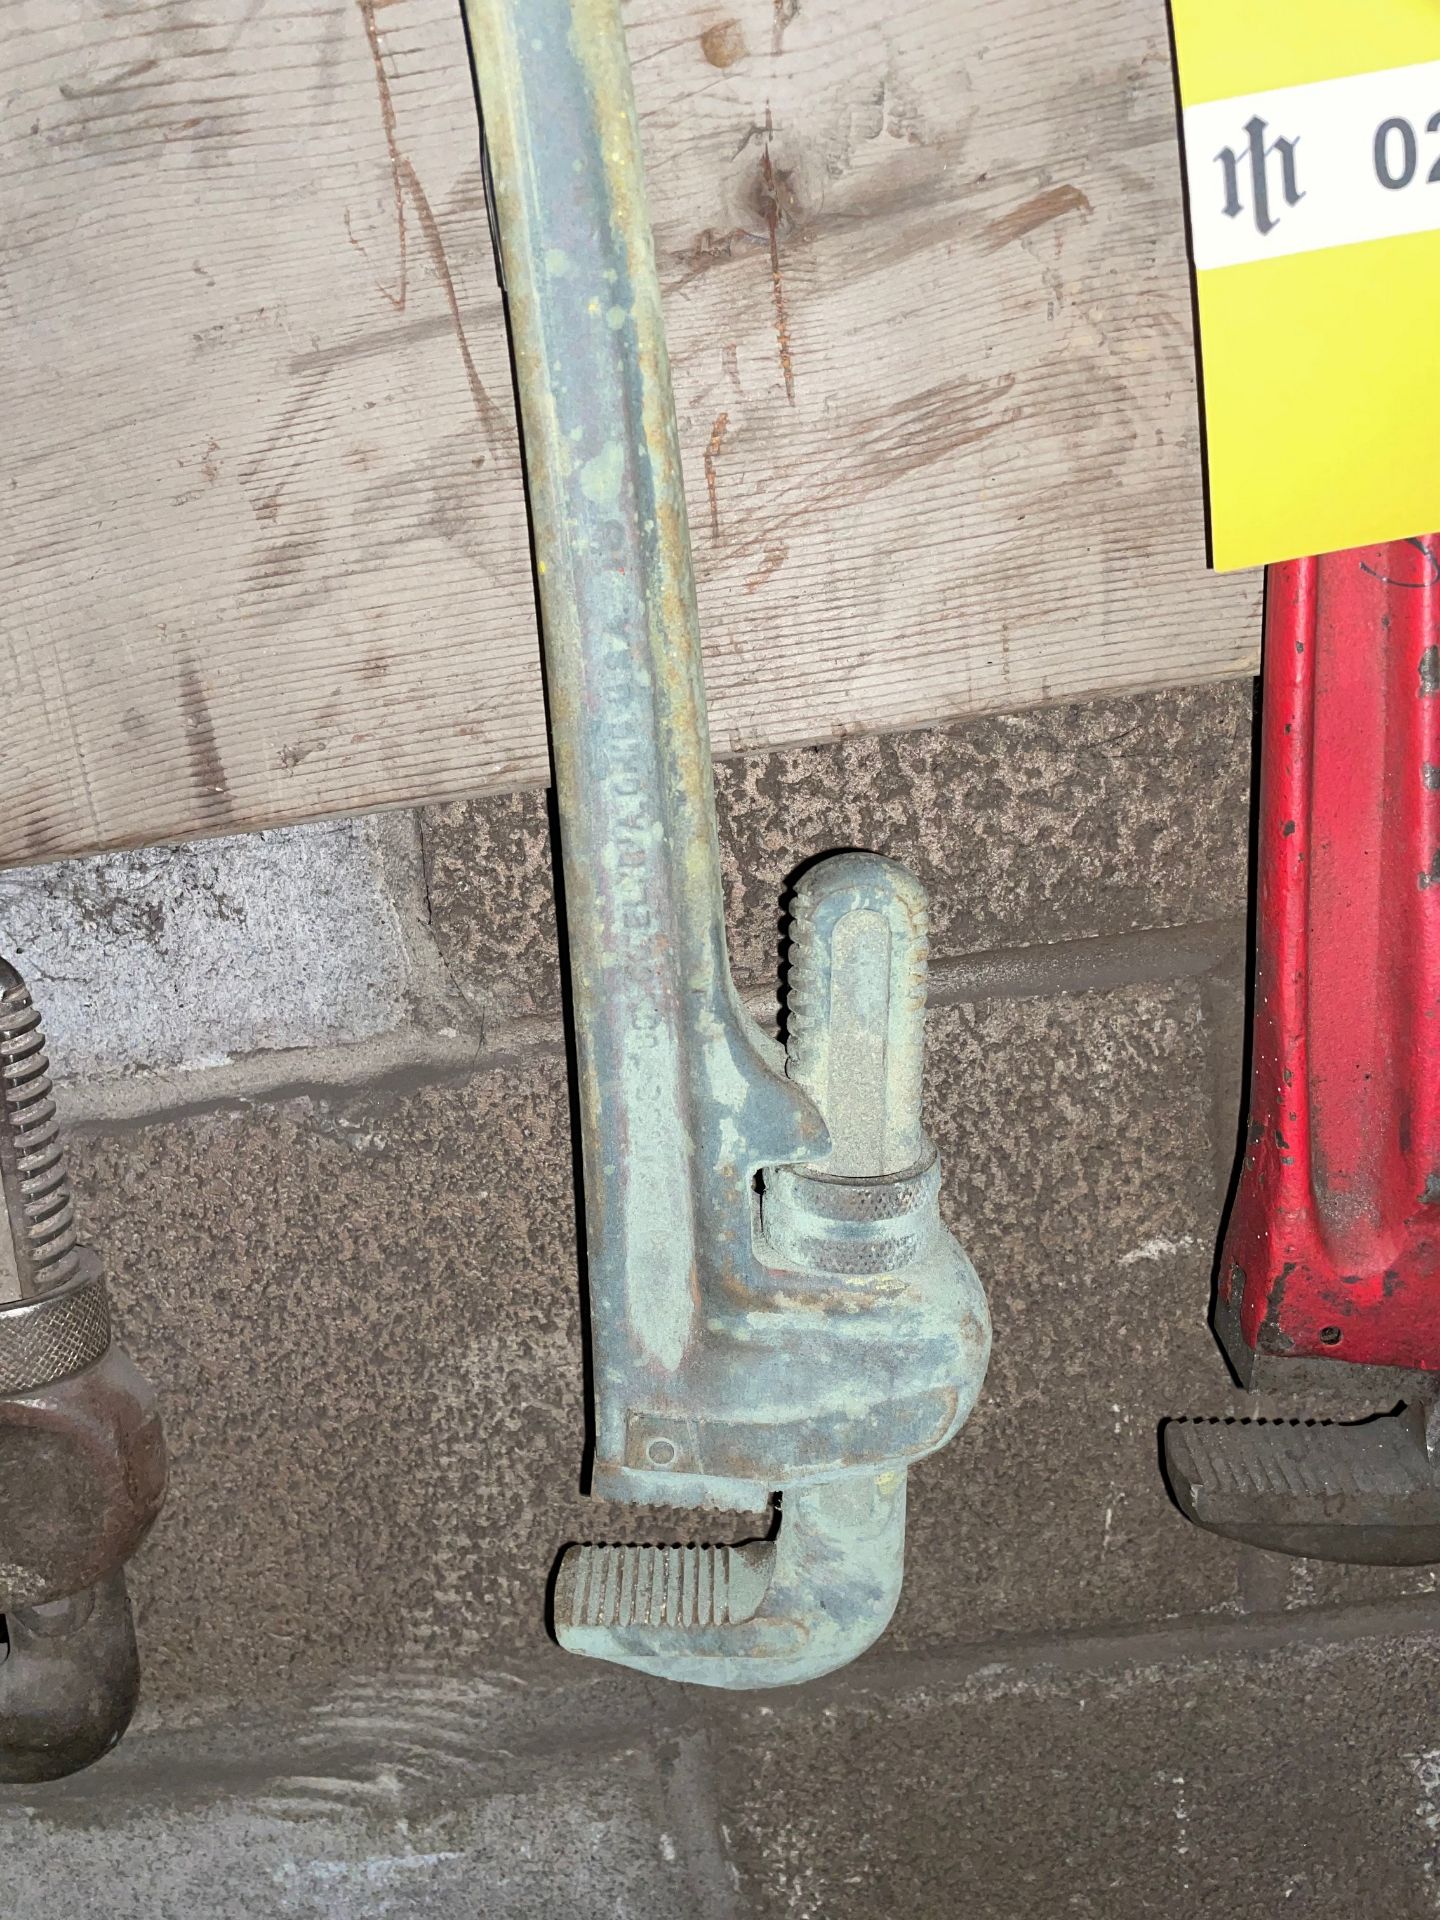 18" Pipe Wrench - Image 3 of 3